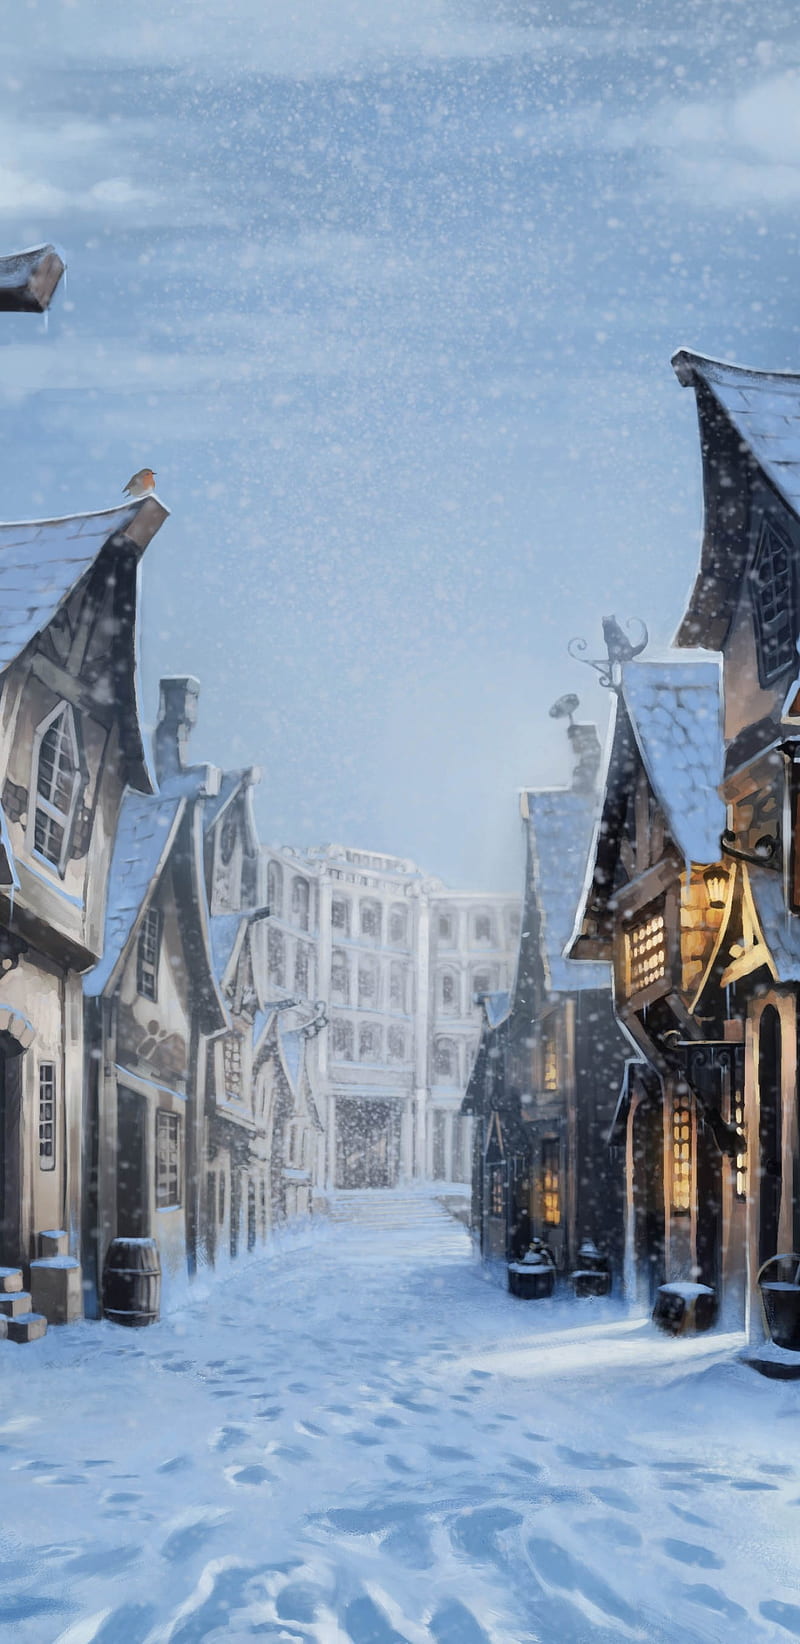 Diagon Alley wallpaper by Janoble69  Download on ZEDGE  73c3